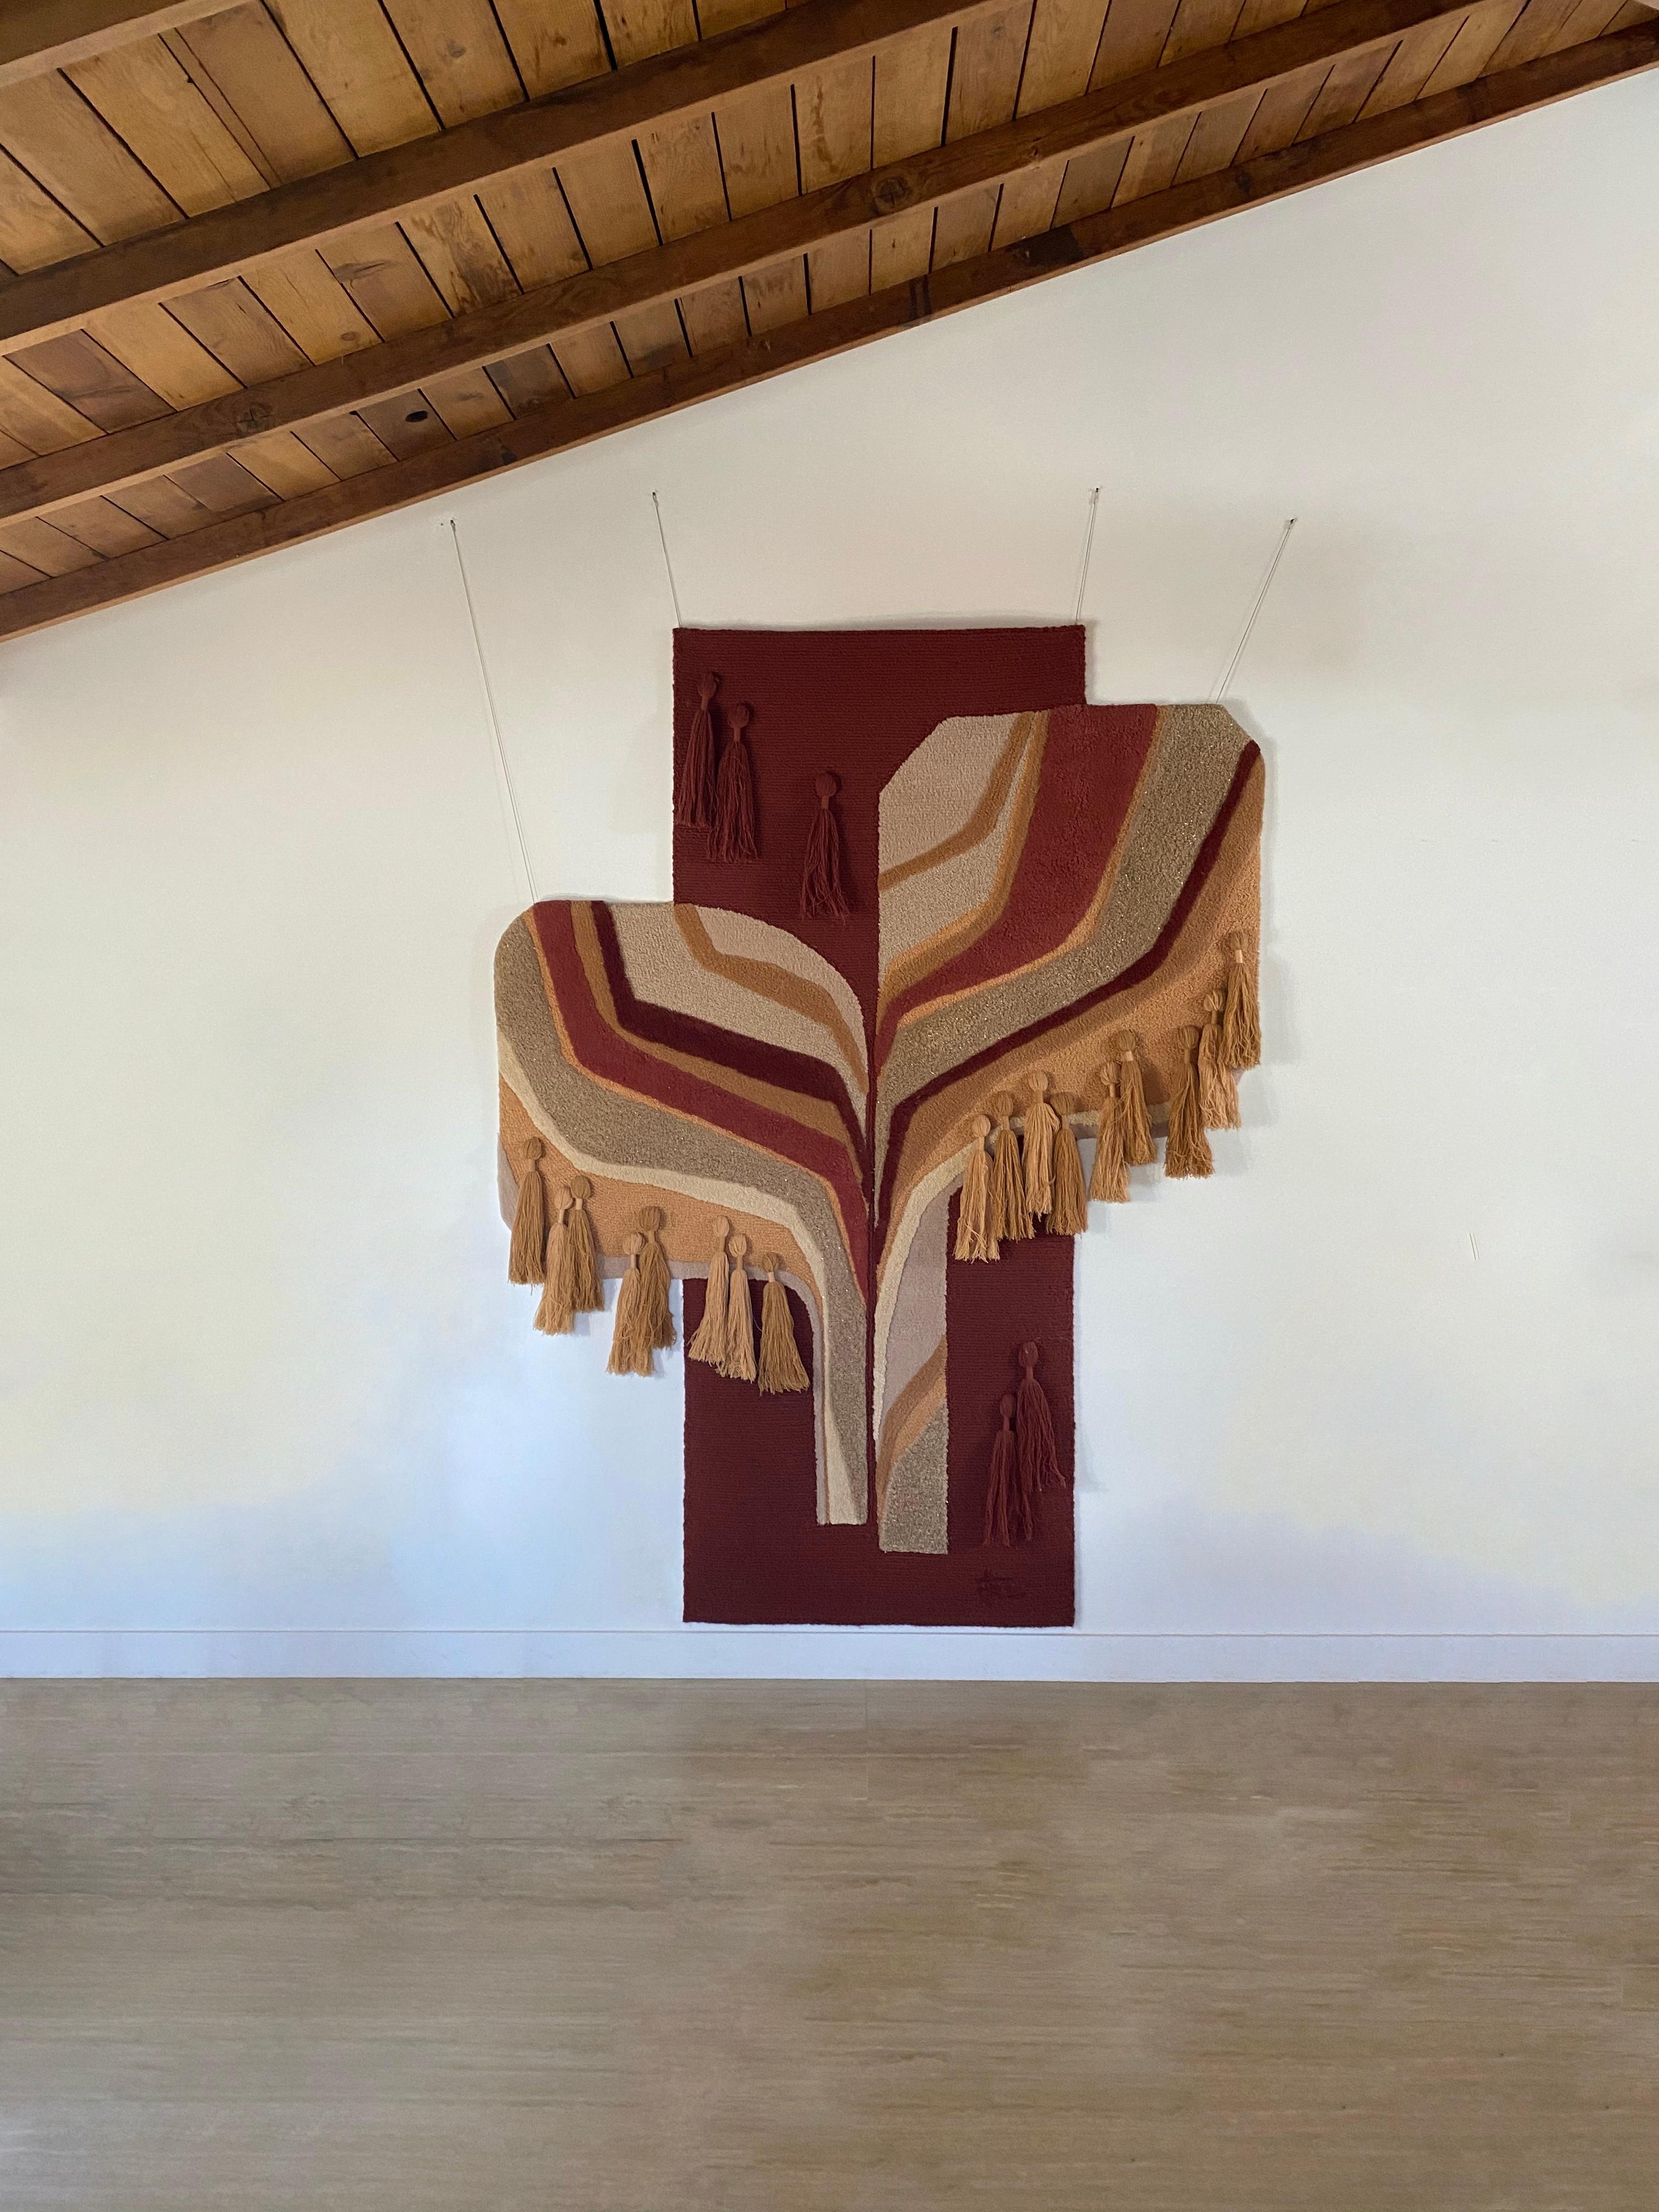 This monumentally sized fiber art tapestry was handmade by Tekima, Germany in circa 1970. The stunning use of materials and colors create a vibrant and unique design supported by four wires. The main colors of burgundy, browns and greys are accented